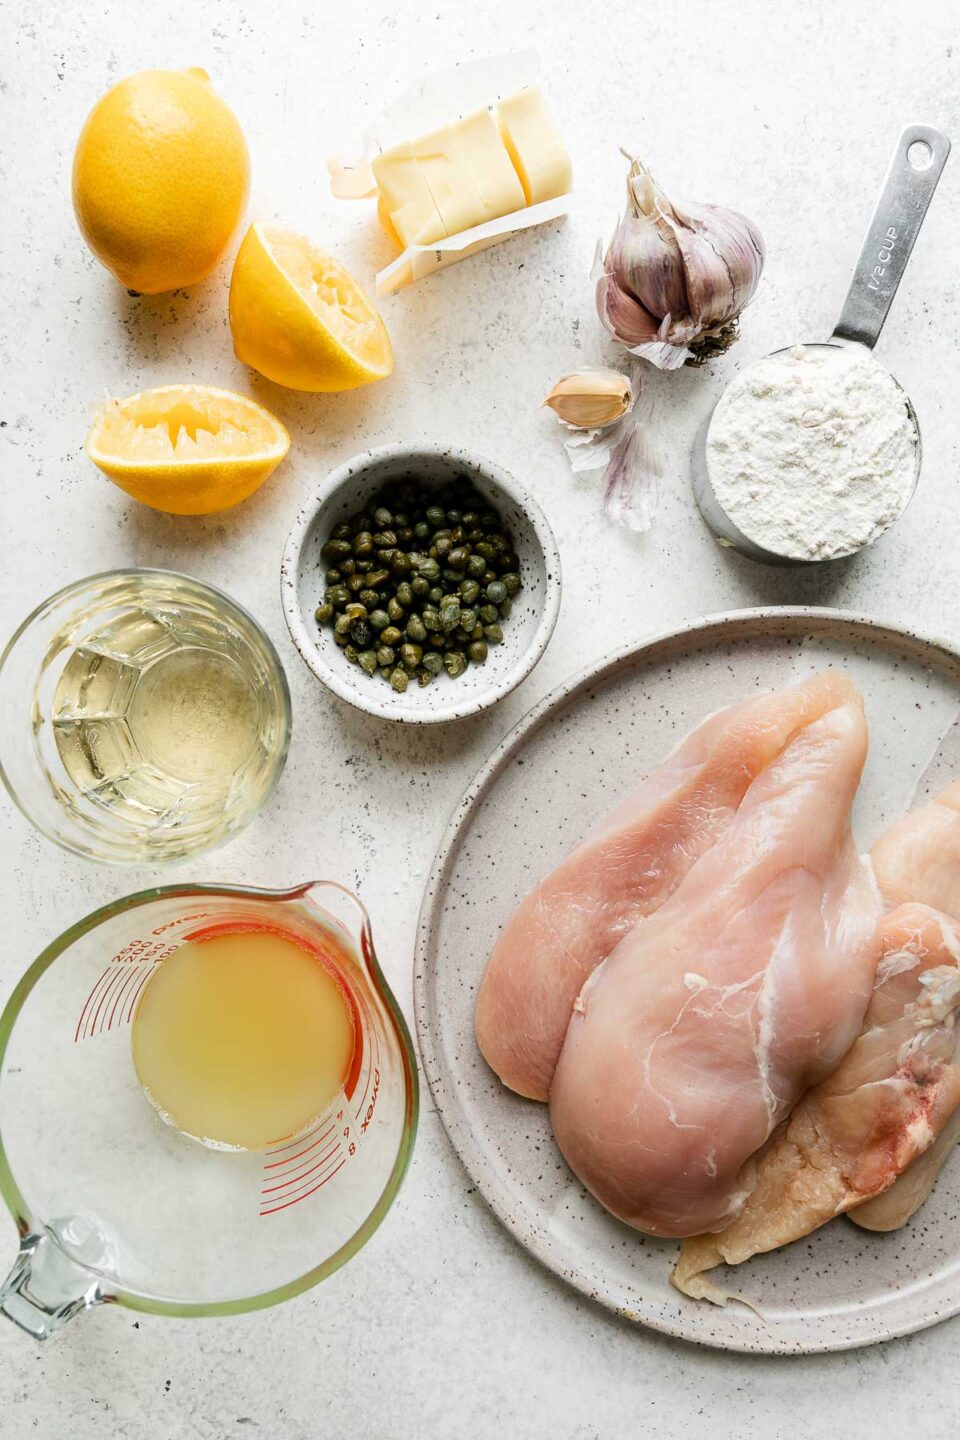 Meyer Lemon Chicken Piccata ingredients arranged on a creamy white textured surface: boneless, skinless chicken breasts, all-purpose flour, olive oil, garlic, capers, Meyer lemons, dry white wine, and unsalted butter.